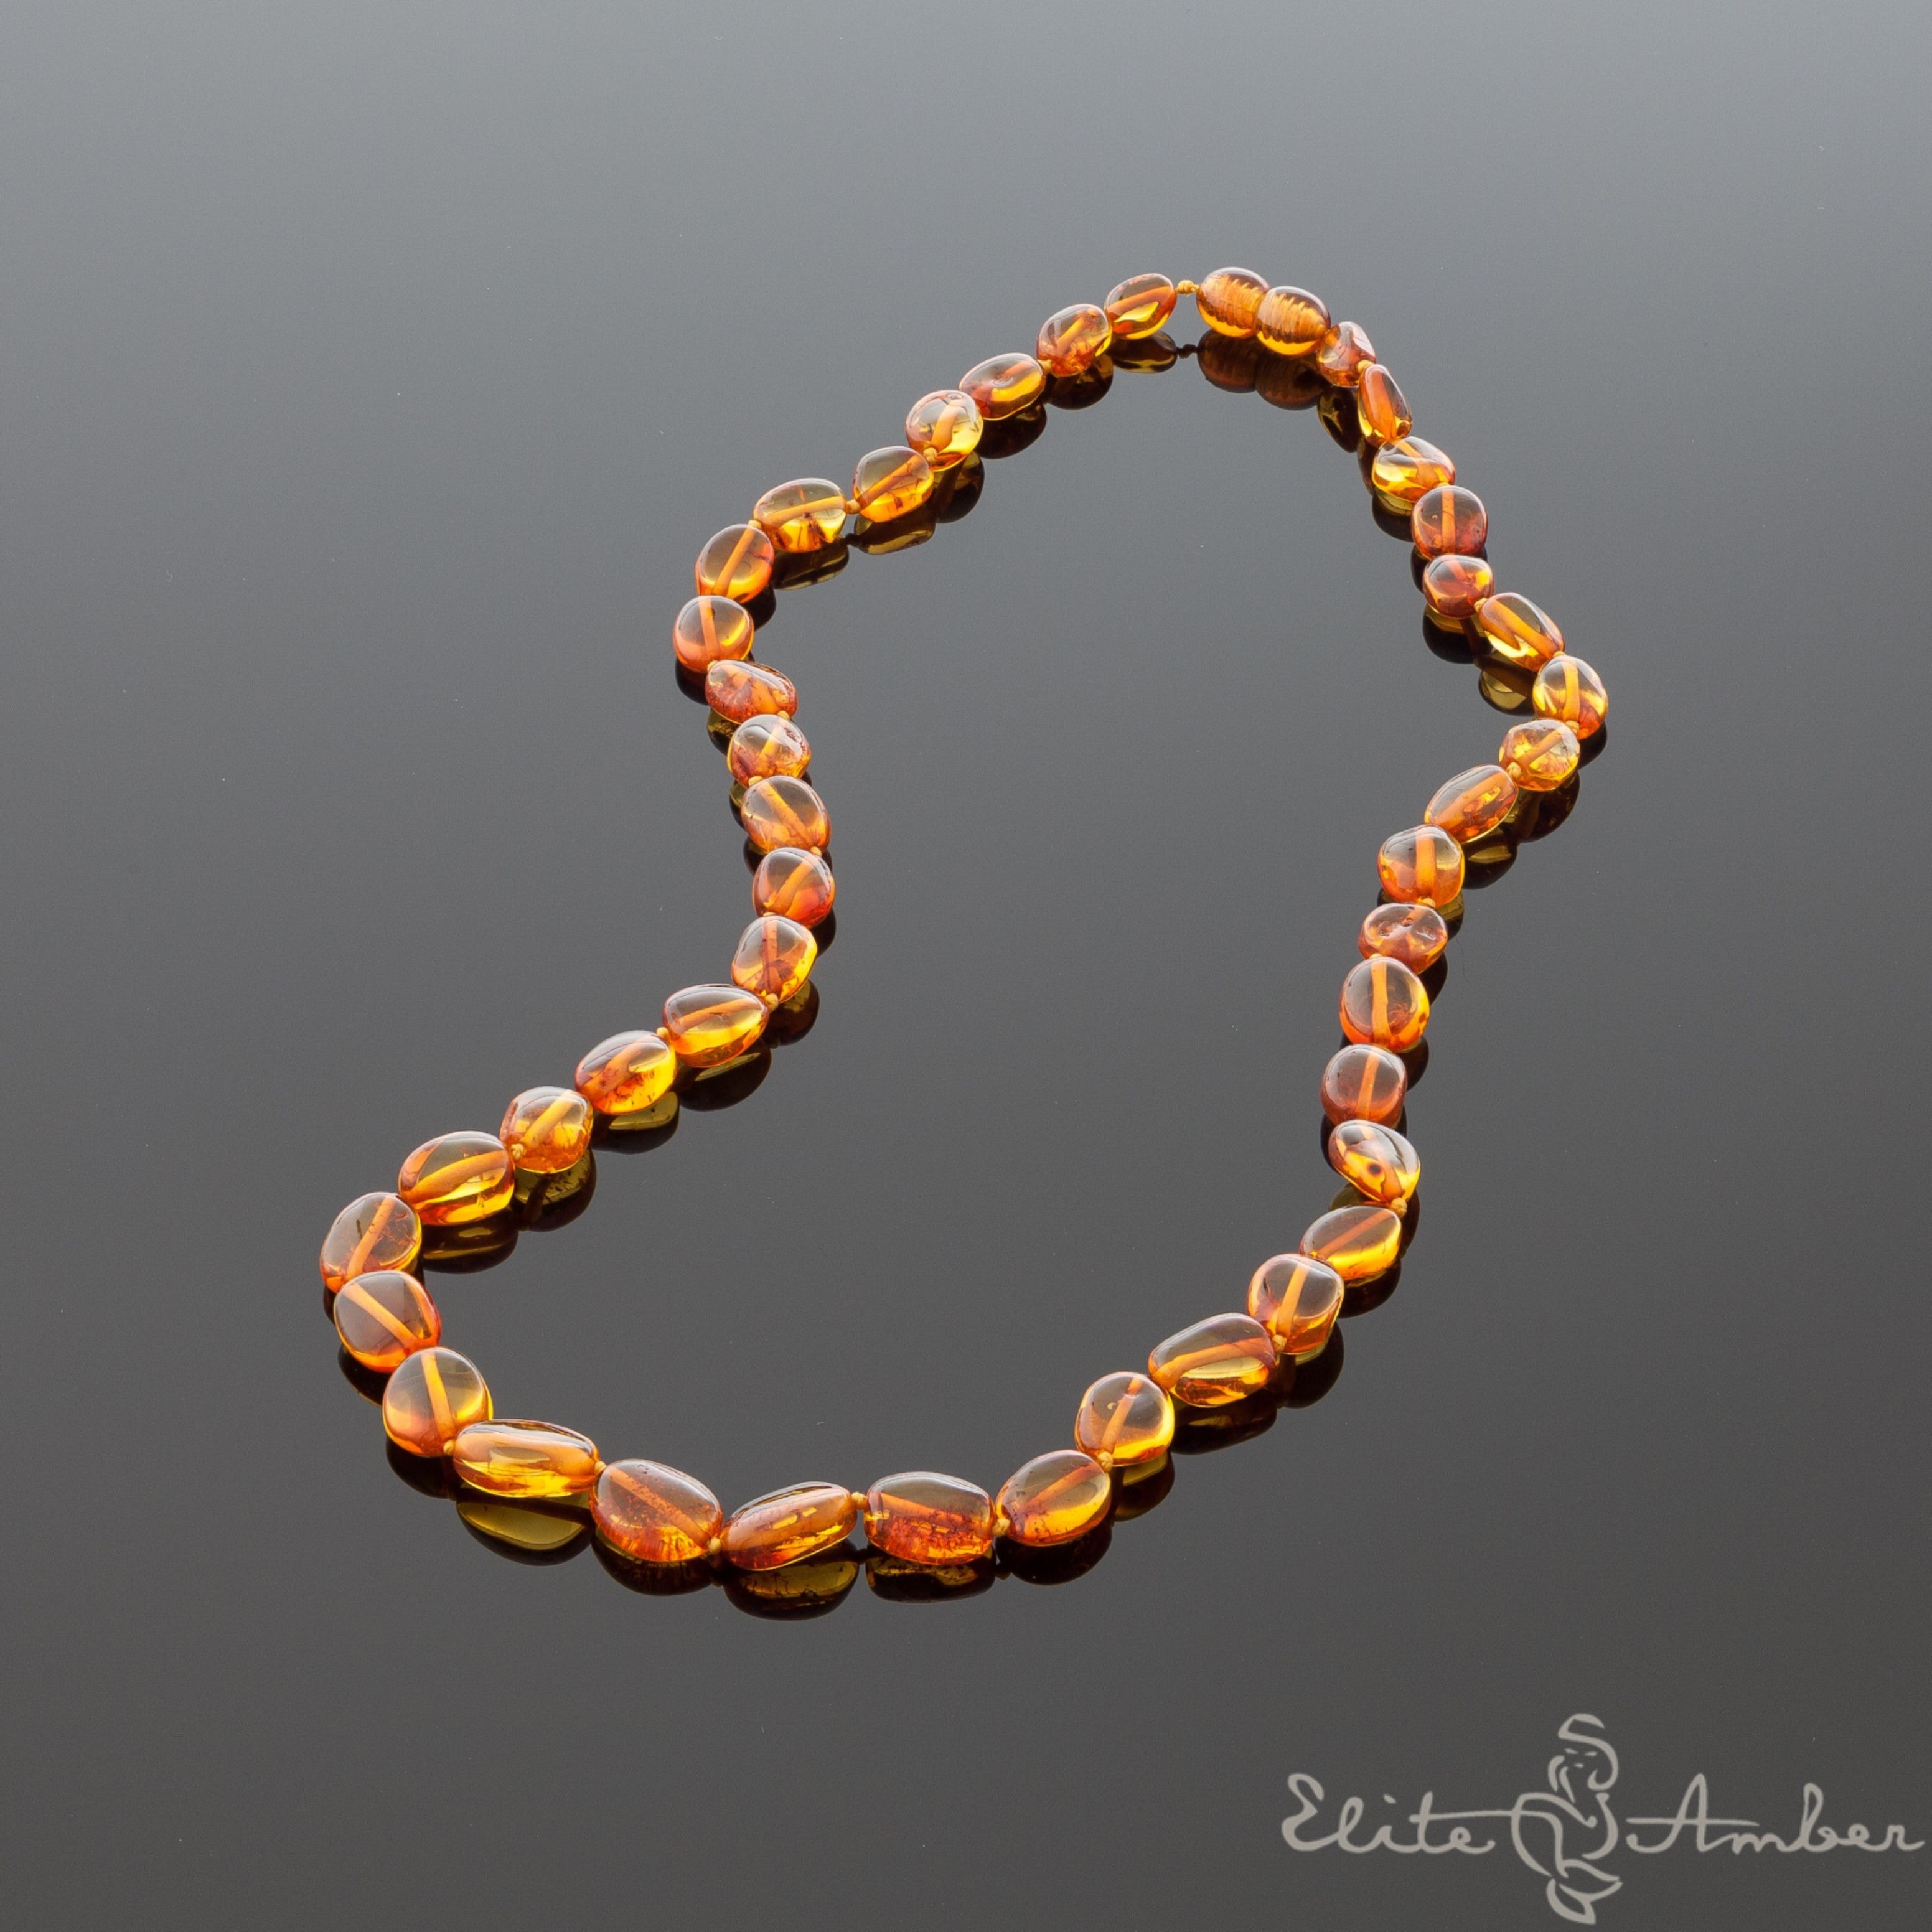 Amber necklace "Polished amber pebbles"